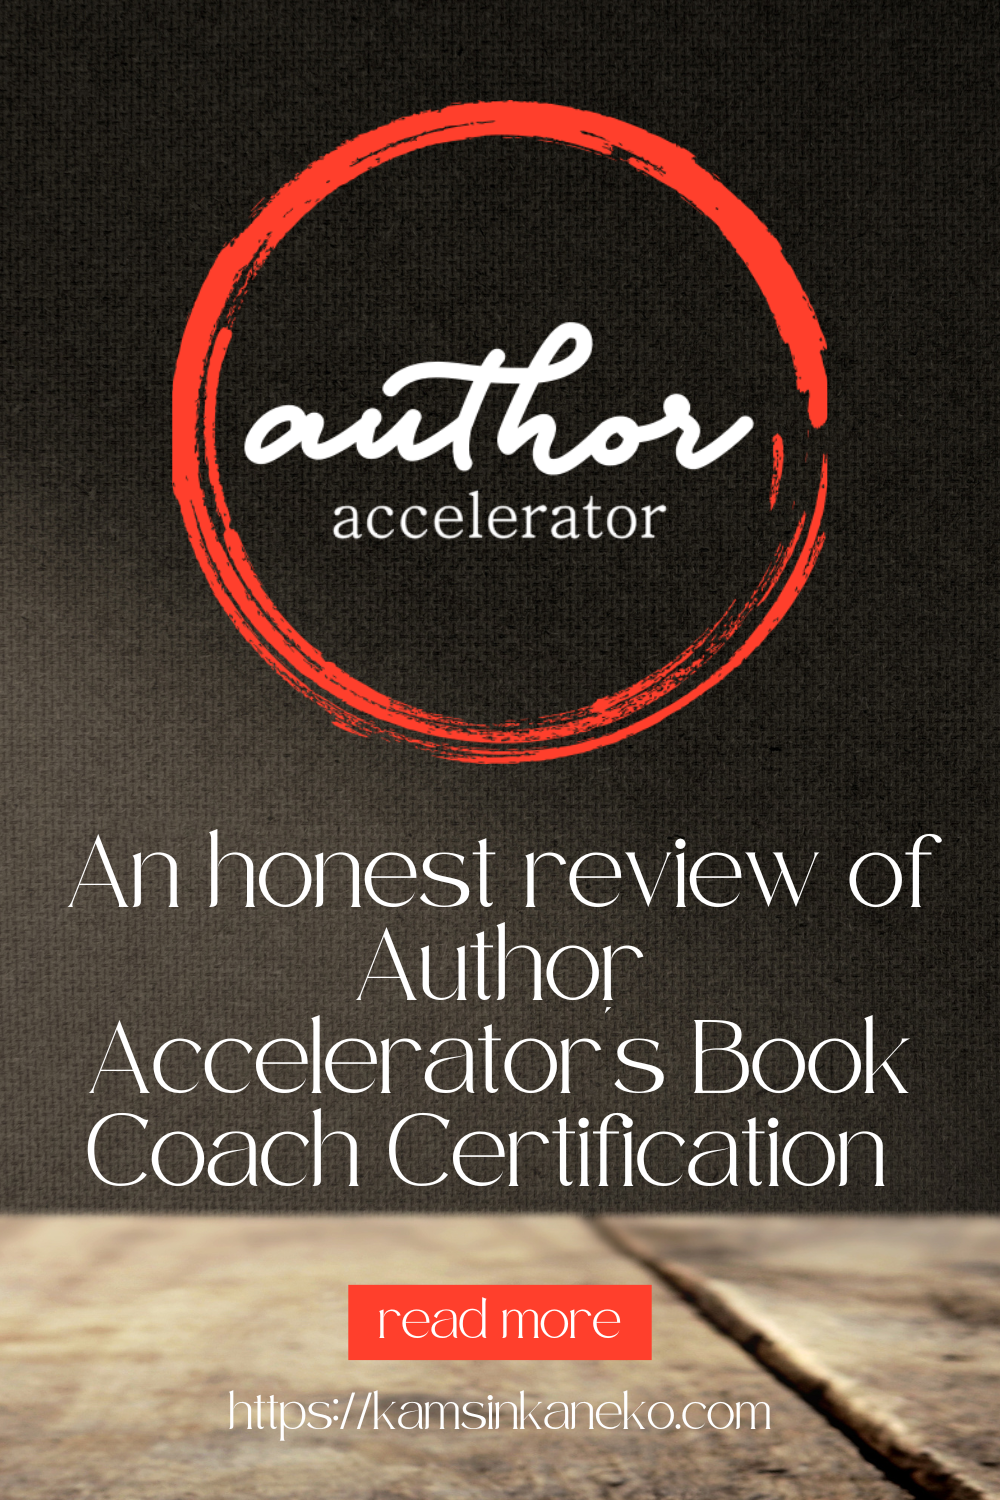 An Honest Review of Author Accelerator's Book Coach Certification